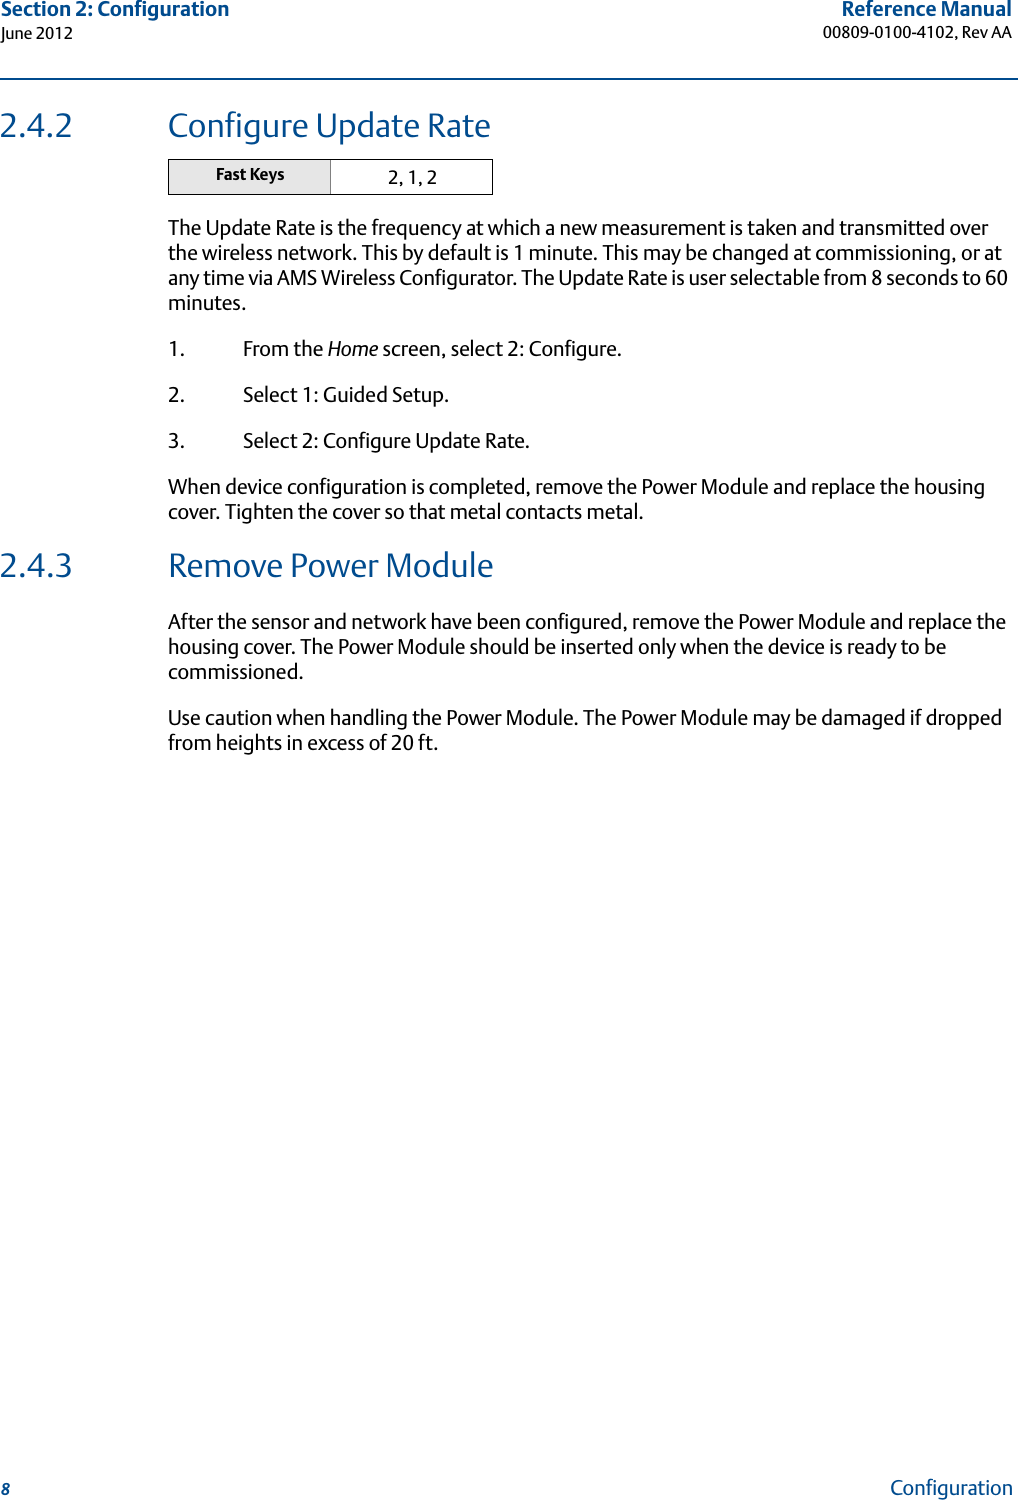 8Reference Manual00809-0100-4102, Rev AASection 2: ConfigurationJune 2012Configuration2.4.2 Configure Update RateThe Update Rate is the frequency at which a new measurement is taken and transmitted over the wireless network. This by default is 1 minute. This may be changed at commissioning, or at any time via AMS Wireless Configurator. The Update Rate is user selectable from 8 seconds to 60 minutes. 1. From the Home screen, select 2: Configure.2. Select 1: Guided Setup.3. Select 2: Configure Update Rate.When device configuration is completed, remove the Power Module and replace the housing cover. Tighten the cover so that metal contacts metal.2.4.3 Remove Power ModuleAfter the sensor and network have been configured, remove the Power Module and replace the housing cover. The Power Module should be inserted only when the device is ready to be commissioned.Use caution when handling the Power Module. The Power Module may be damaged if dropped from heights in excess of 20 ft.Fast Keys 2, 1, 2